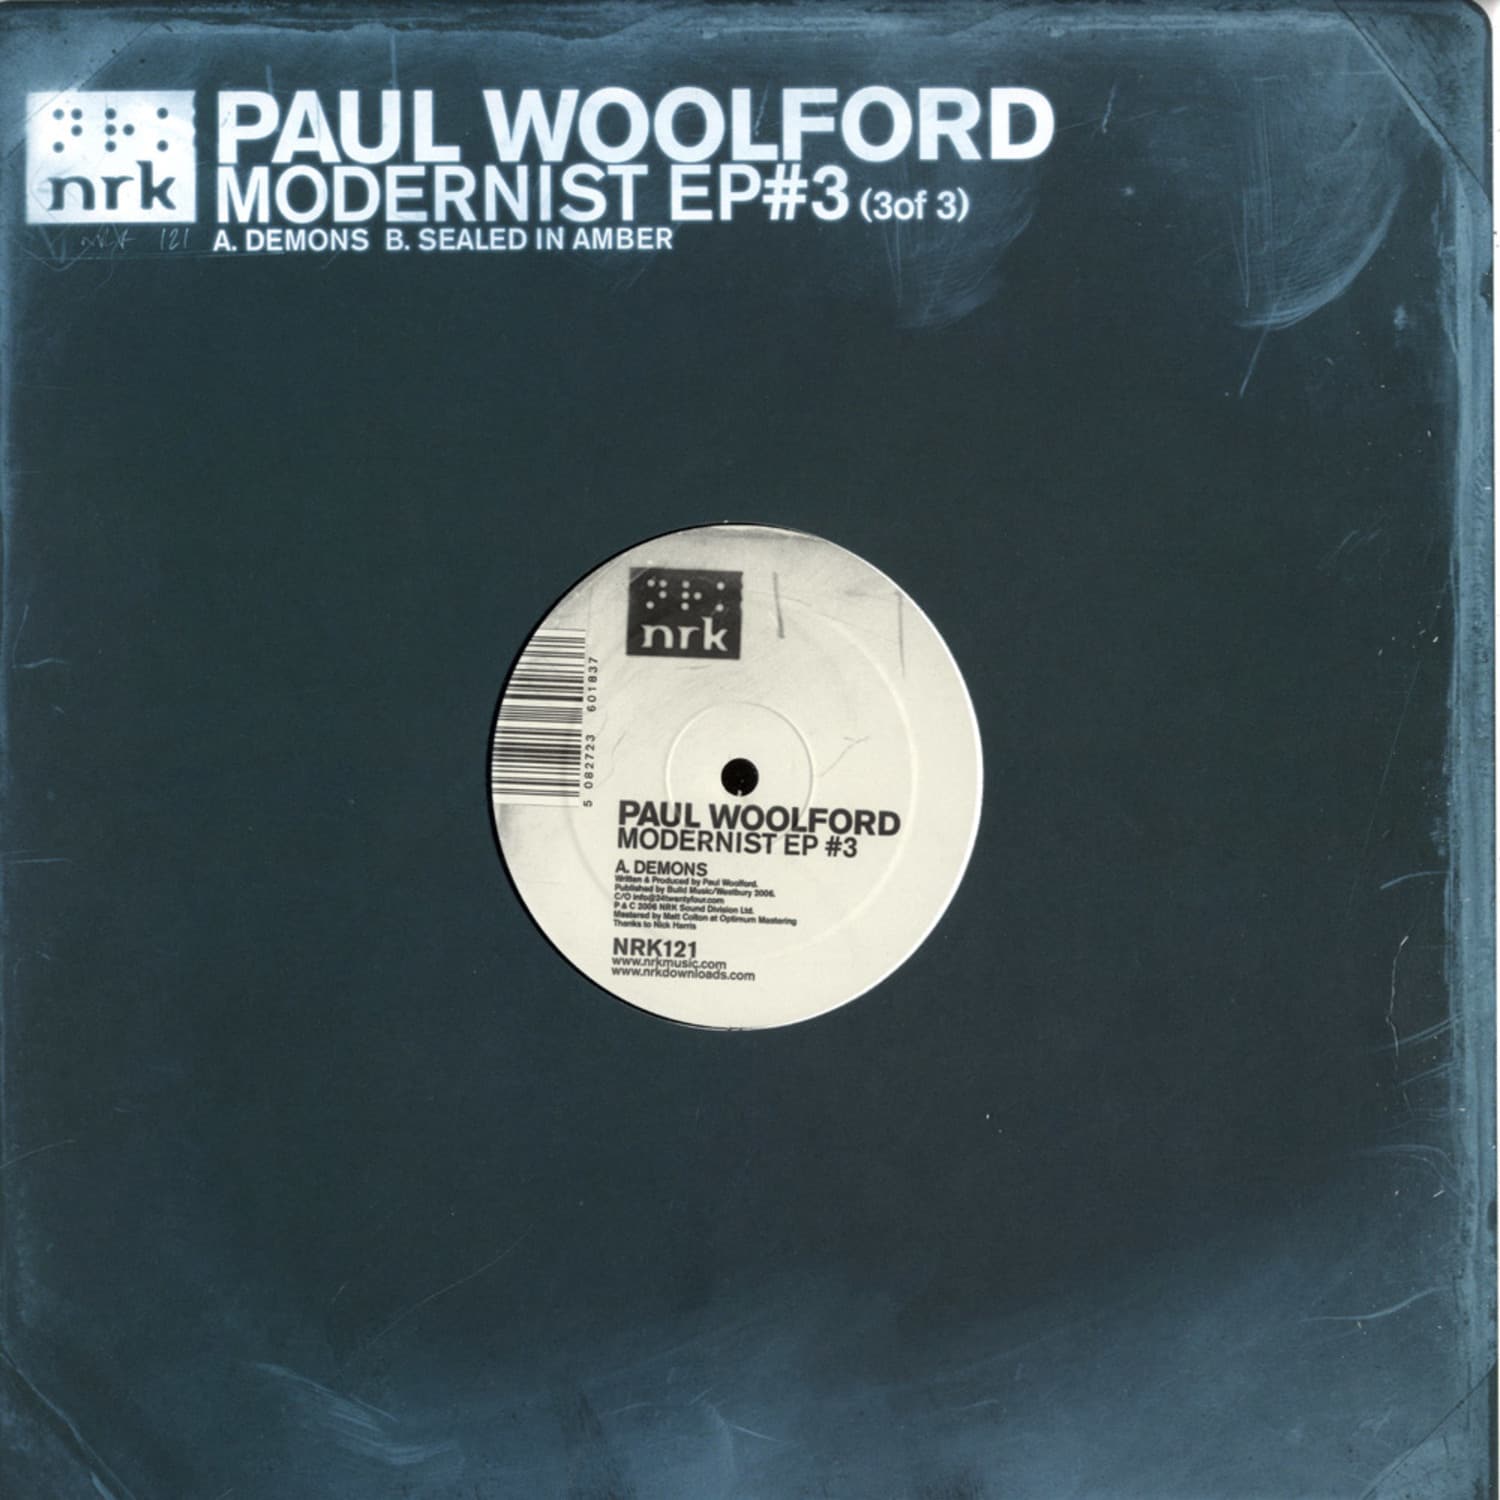 Paul Woolford - THE MODERNIST EP 3 OF 3